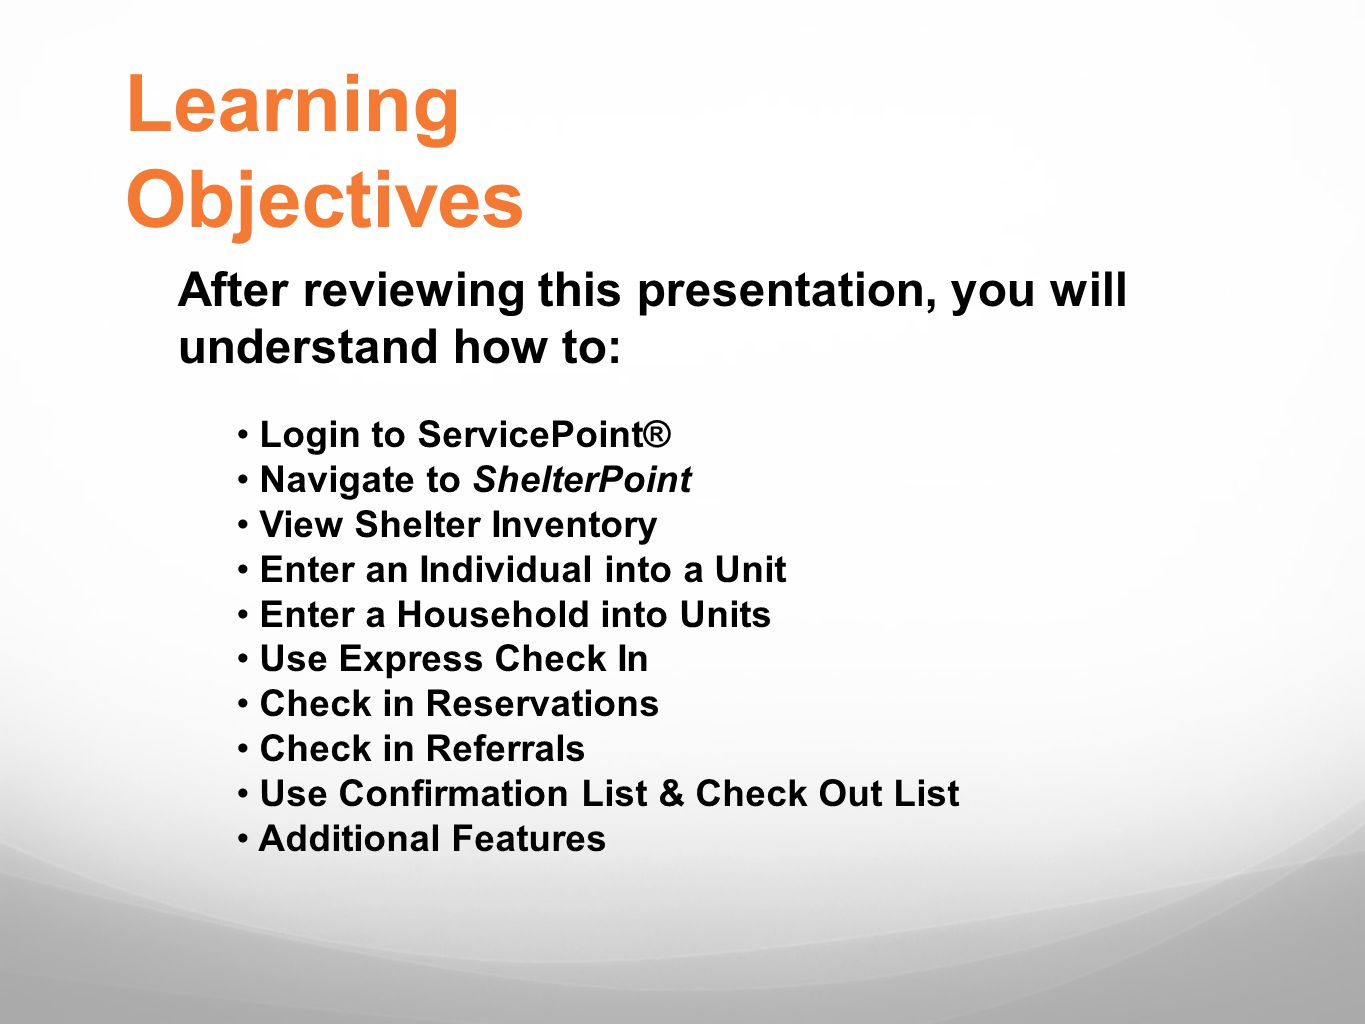 Learning Objectives After reviewing this presentation, you will understand how to: Login to ServicePoint® Navigate to ShelterPoint View Shelter Inventory Enter an Individual into a Unit Enter a Household into Units Use Express Check In Check in Reservations Check in Referrals Use Confirmation List & Check Out List Additional Features